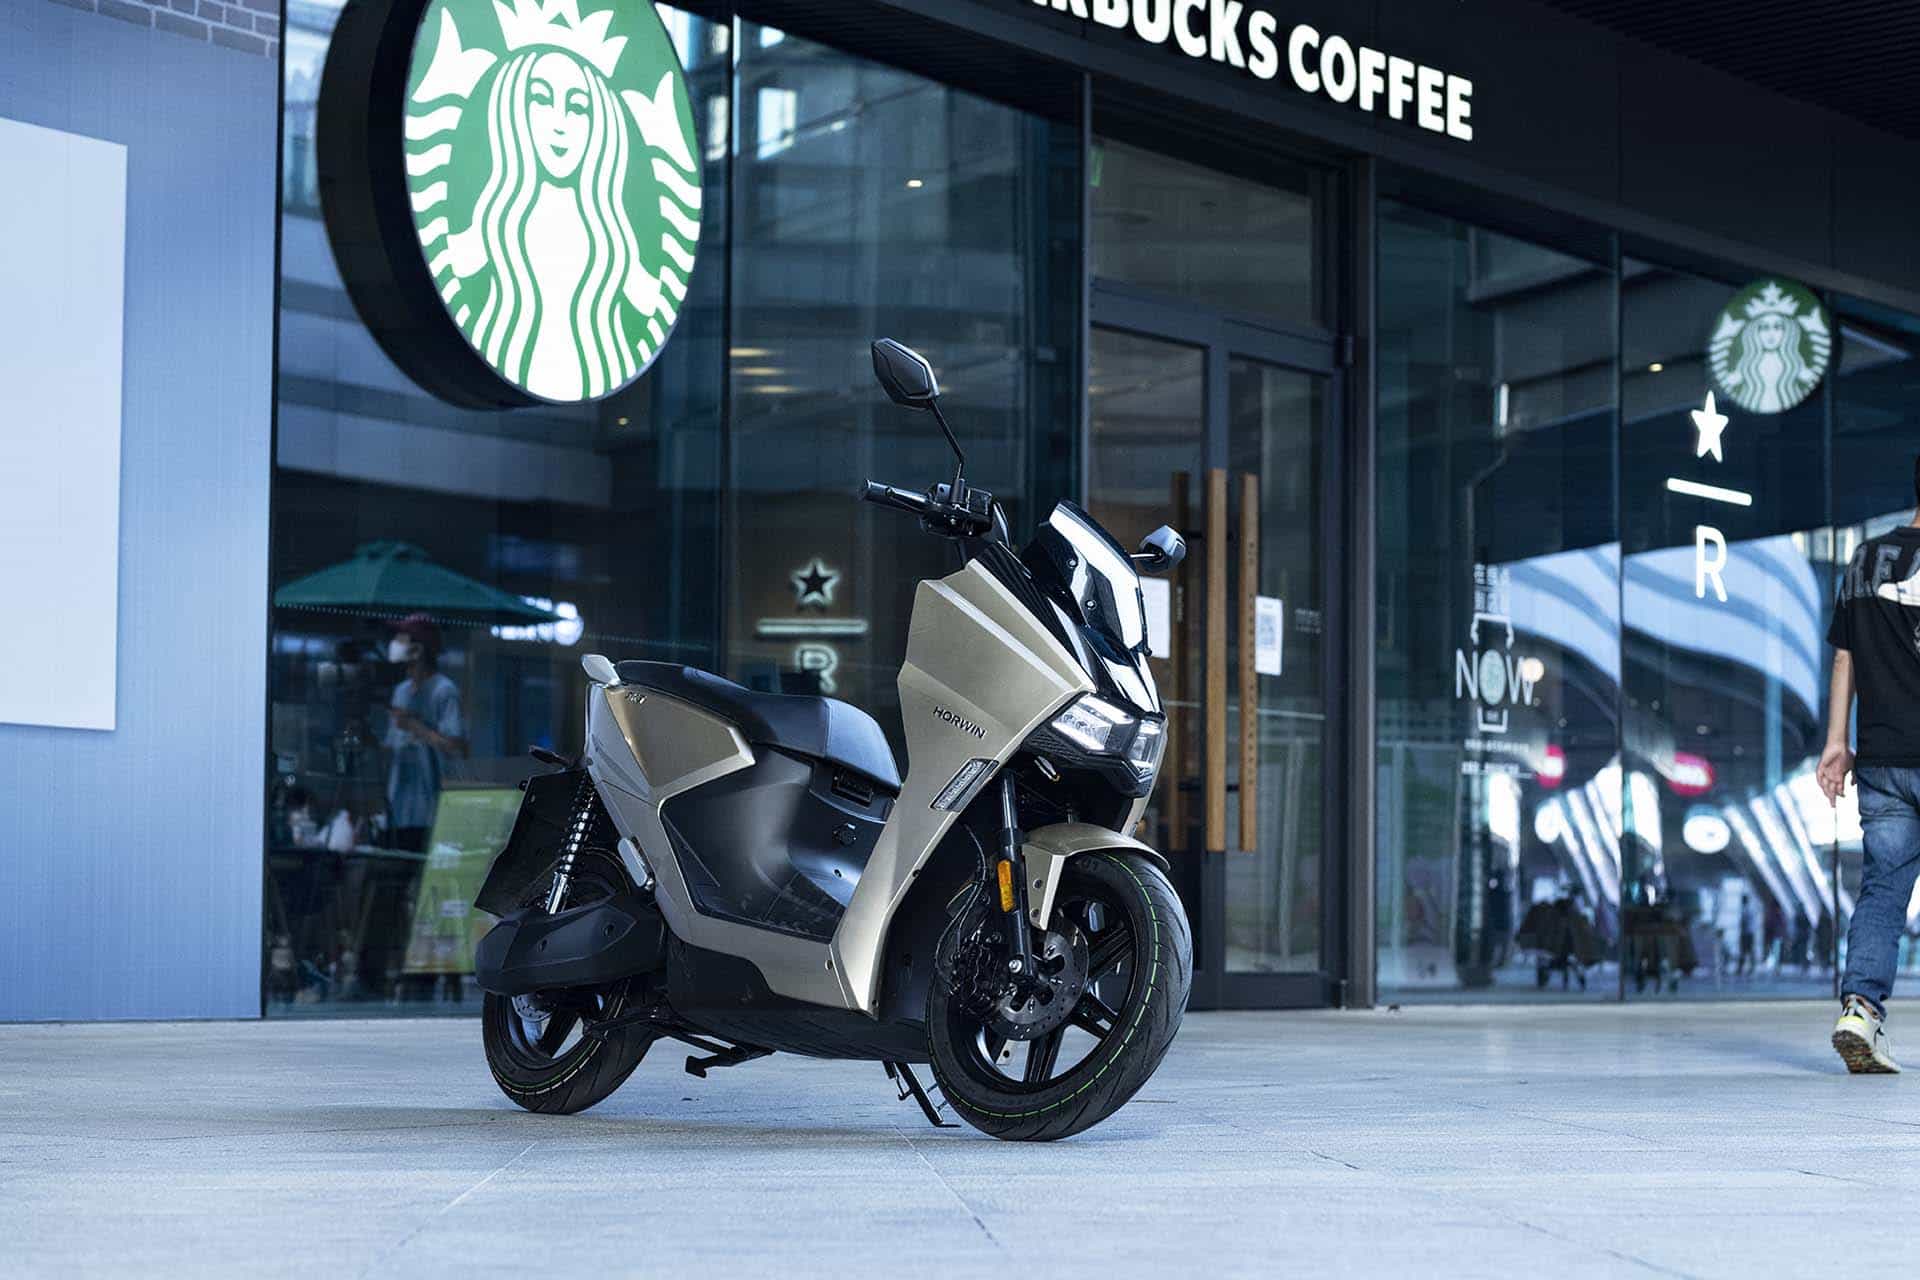 SK3 electric scooter outside Starbucks coffee shop